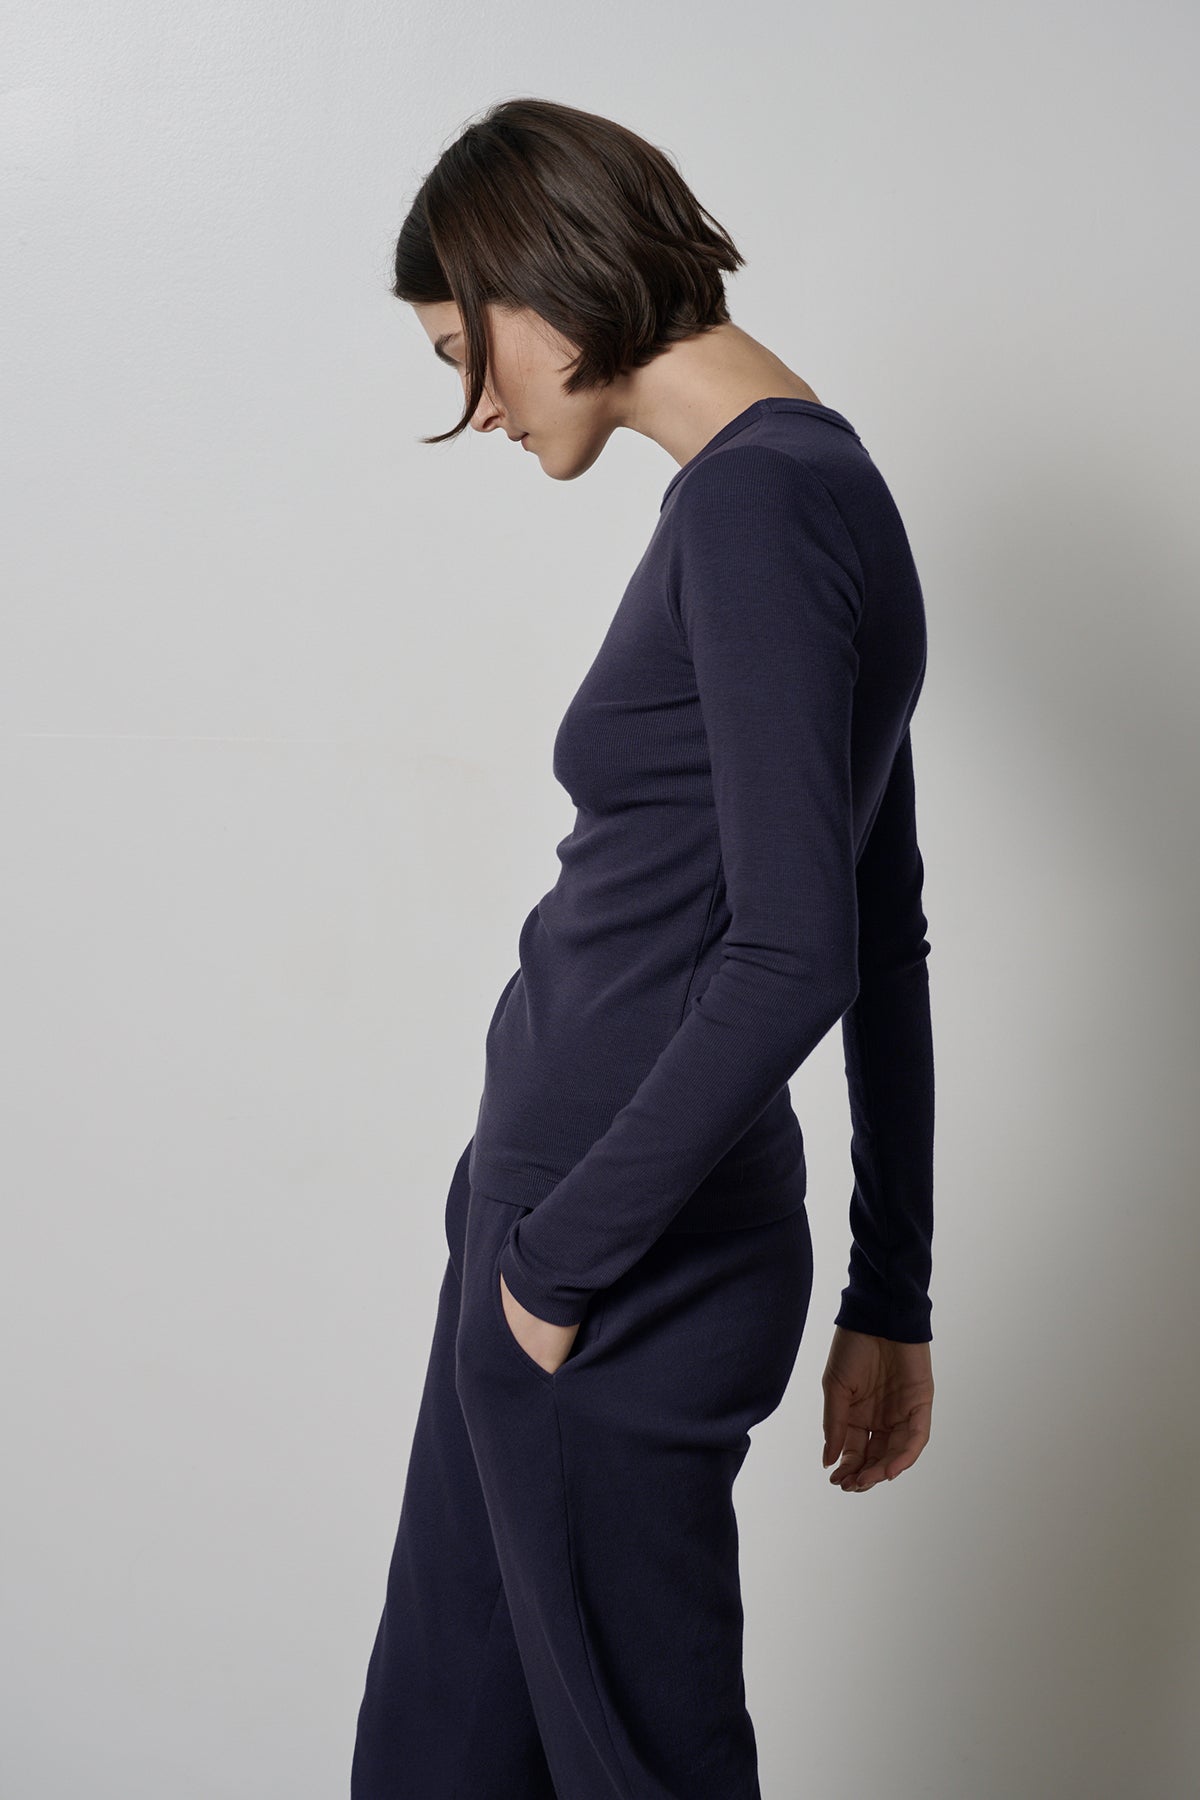   The model is wearing a navy long-sleeved CAMINO TEE and pants by Velvet by Jenny Graham, offering ultimate comfort. 